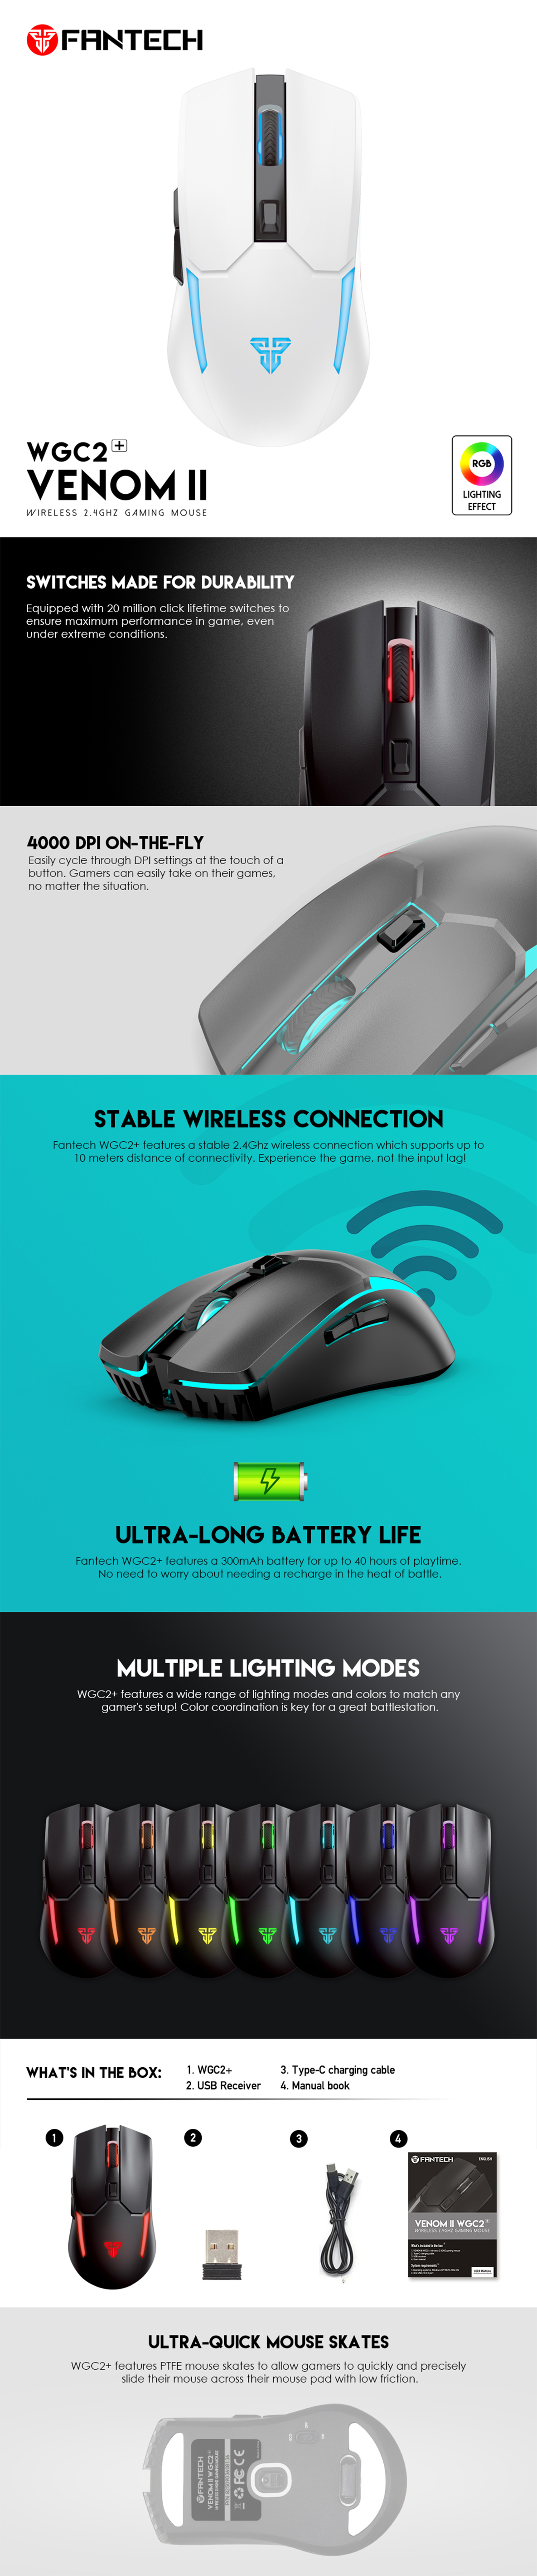 A large marketing image providing additional information about the product Fantech VENOM II WGC2 Wireless Gaming Mouse - White - Additional alt info not provided